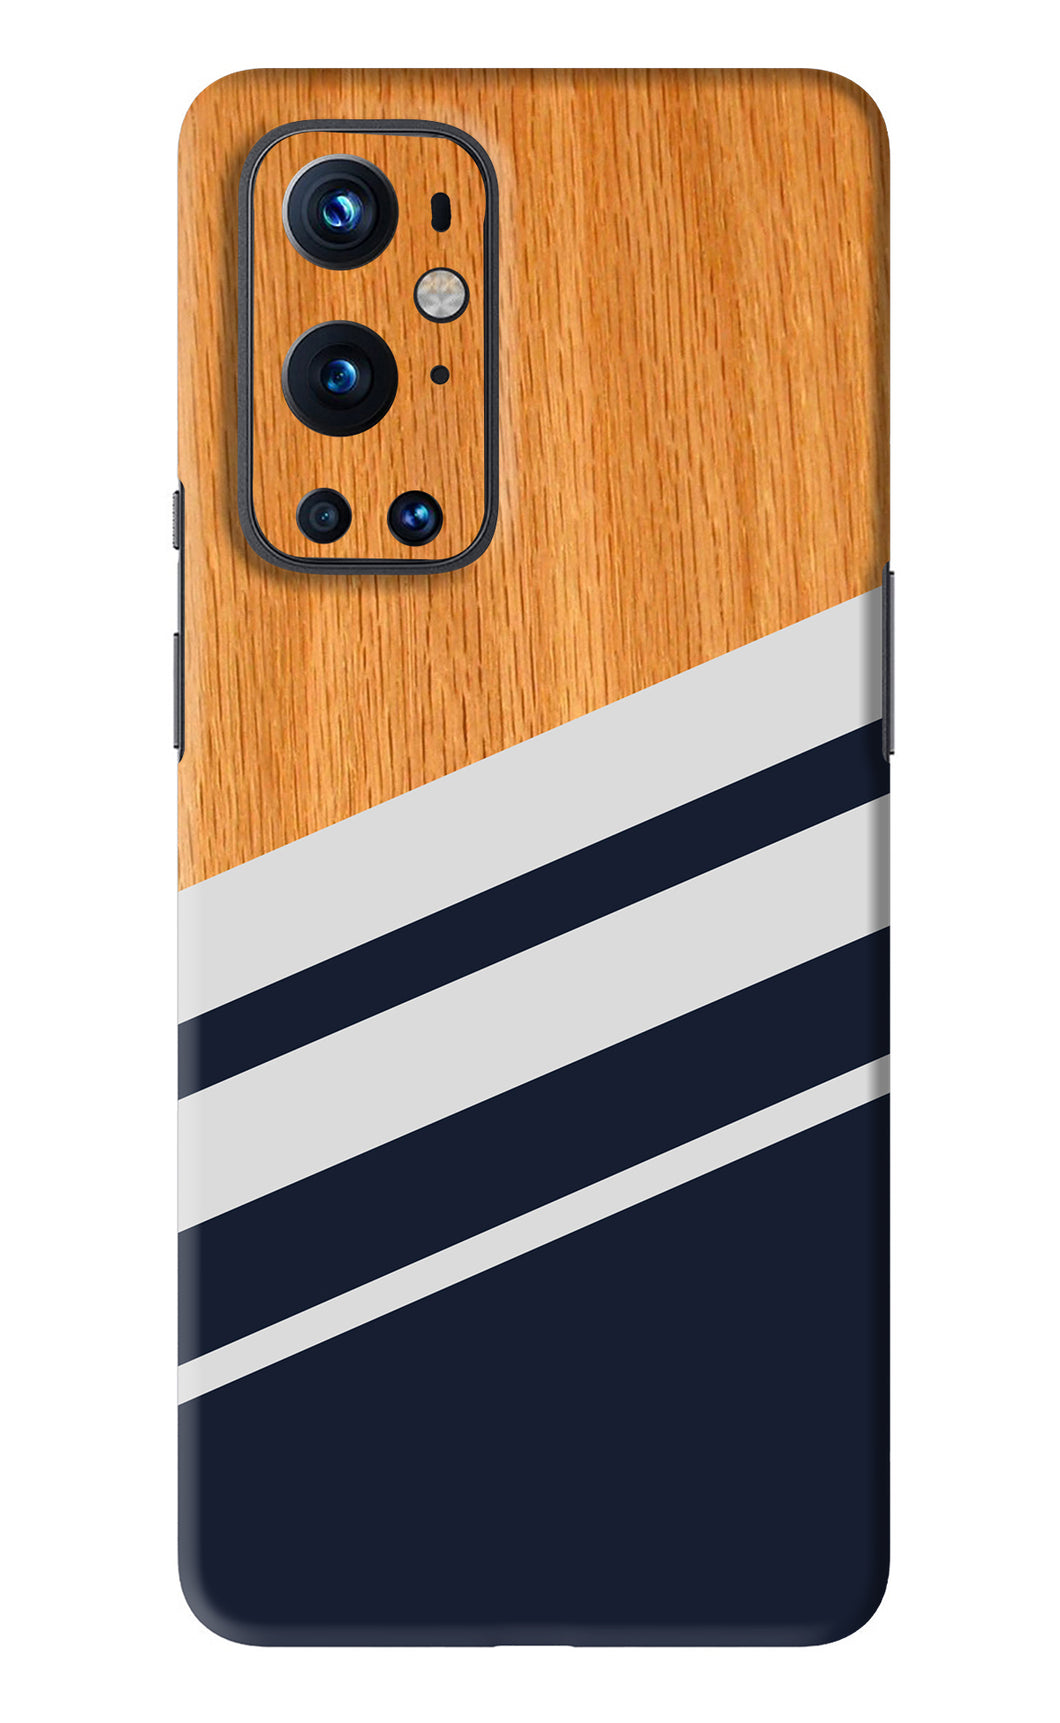 Black And White Wooden OnePlus 9 Pro Back Skin Wrap